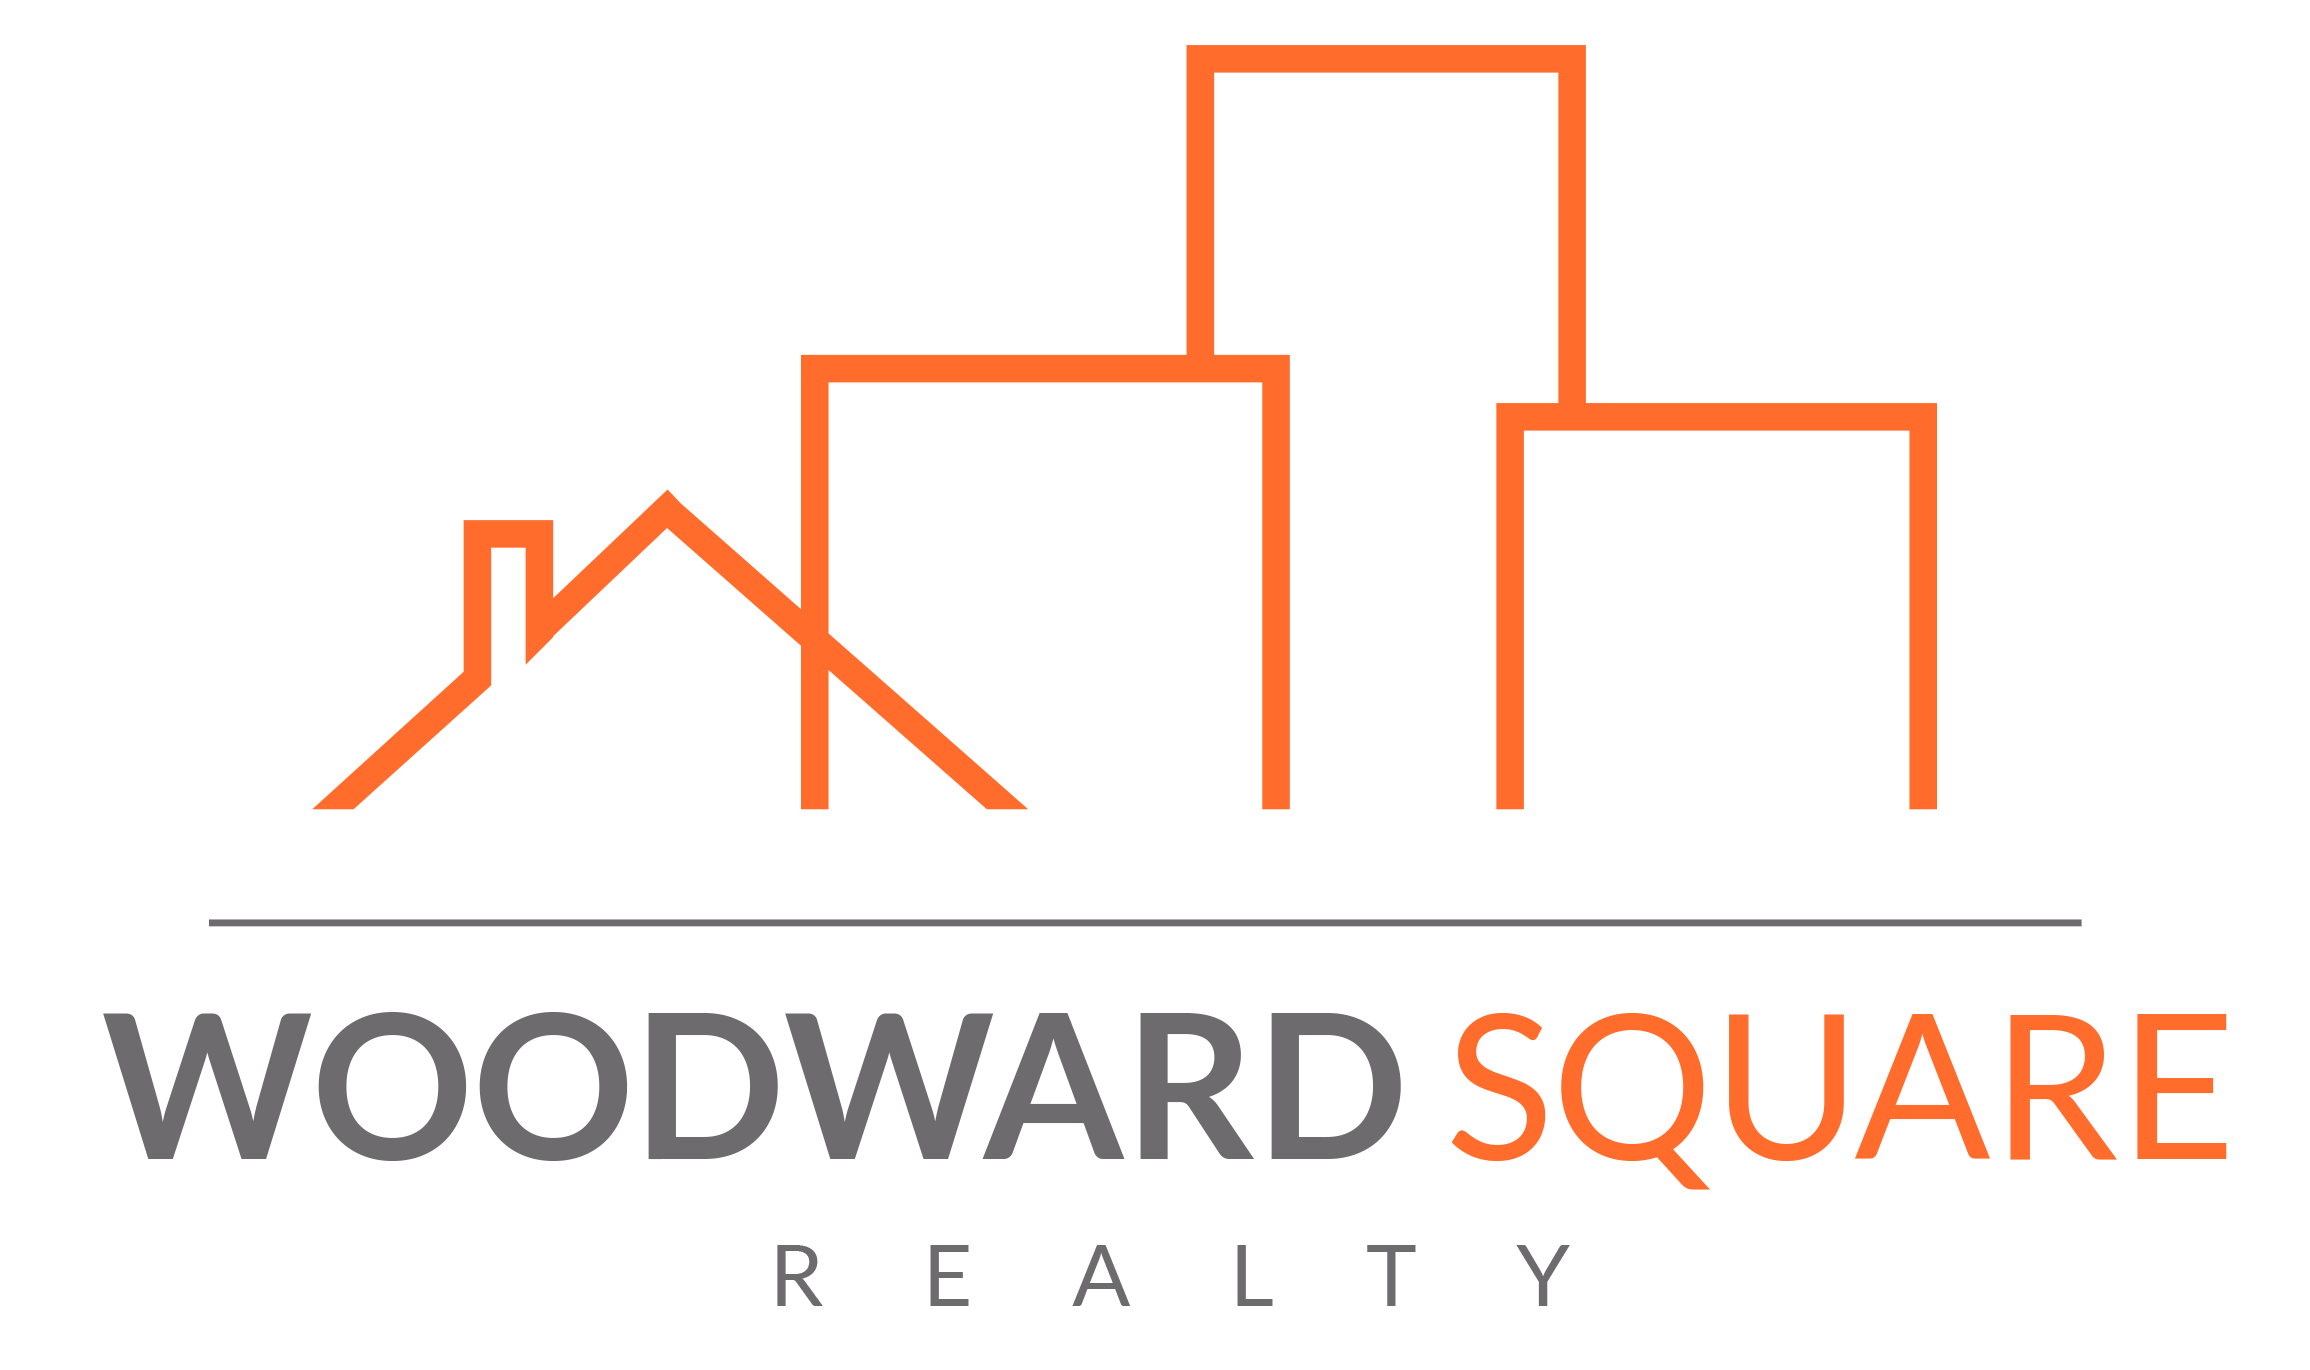 Woodward Square Realty